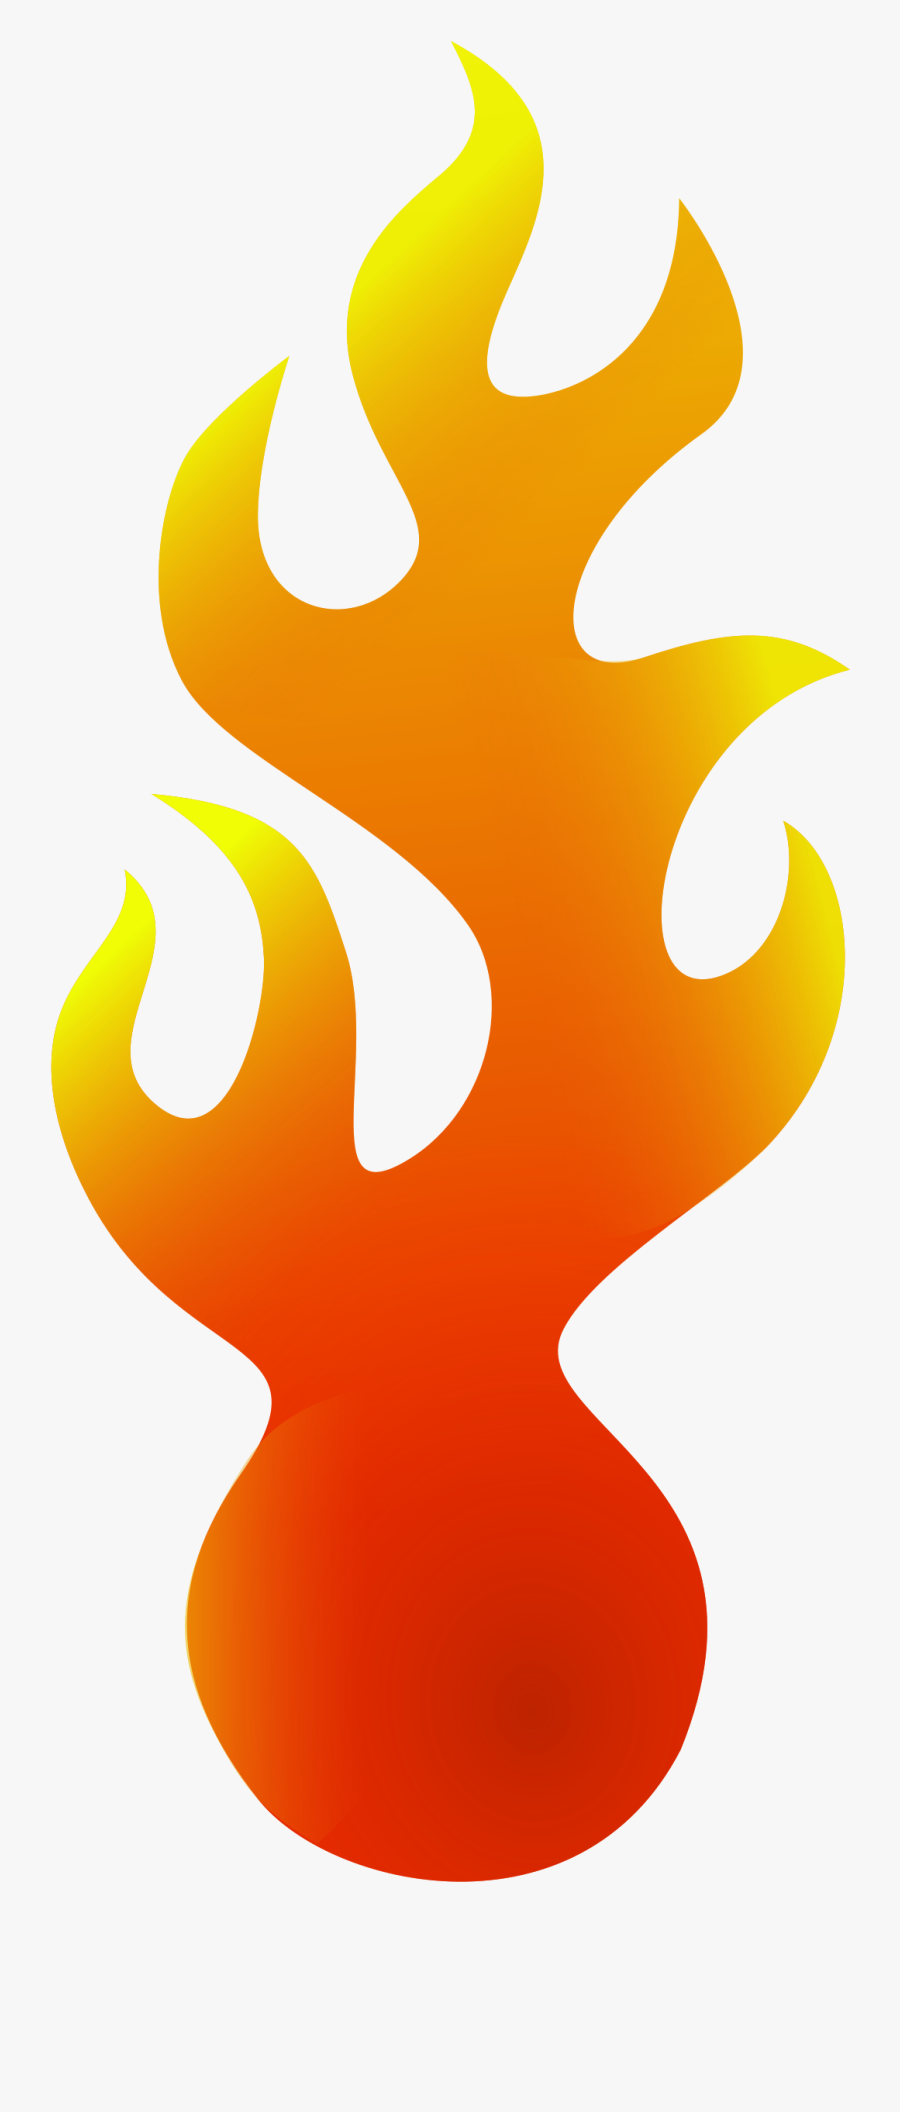 Clipart Fire June Holidays Free Clip Art Images Flame - Hot Wheels Flame Logo, Transparent Clipart